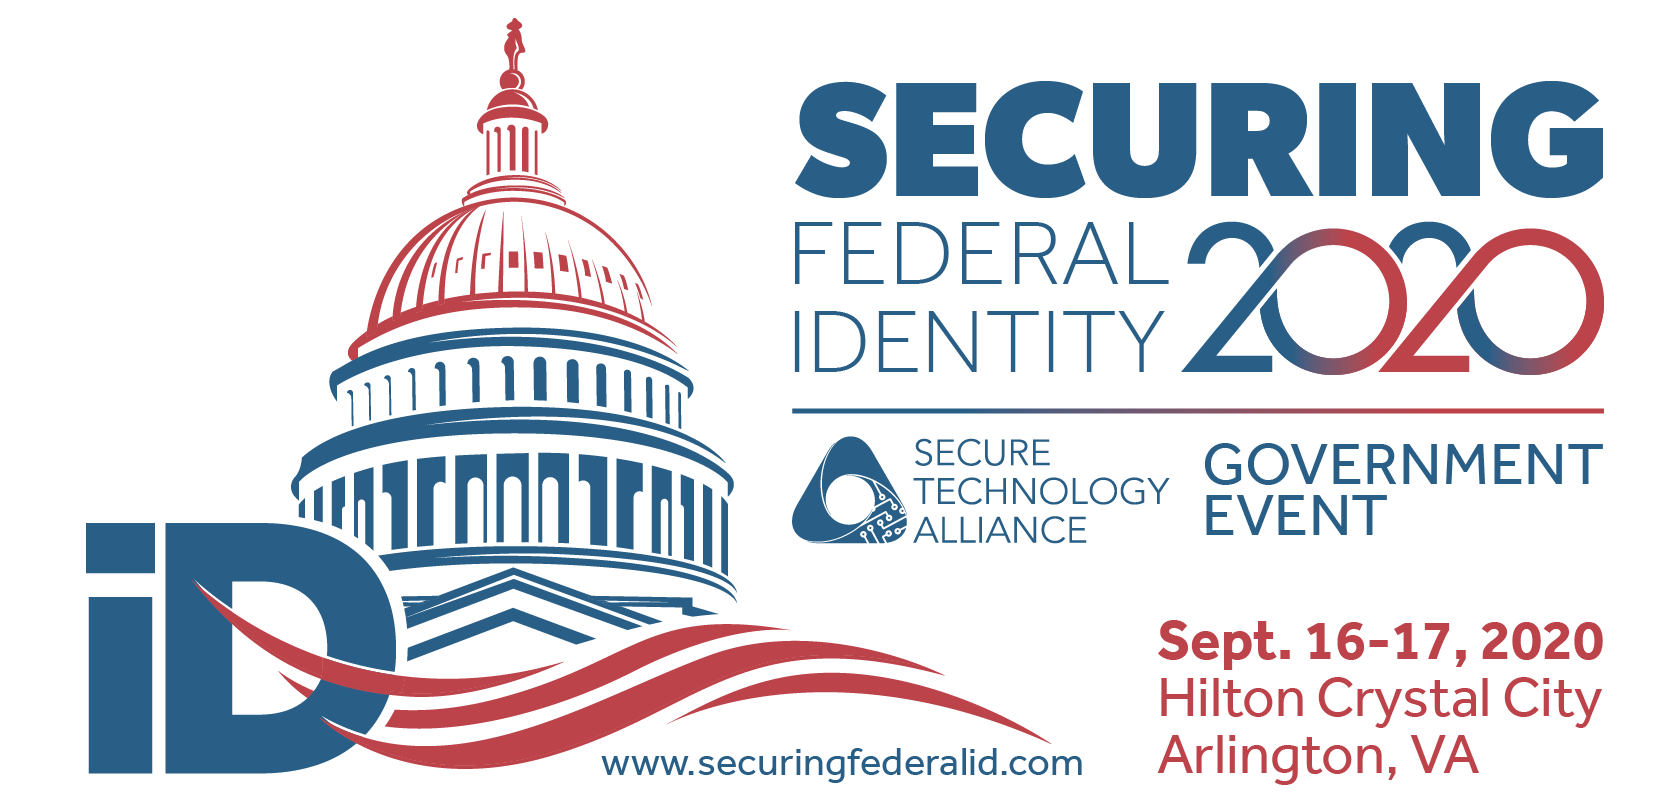 Securing Federal Identity 2020